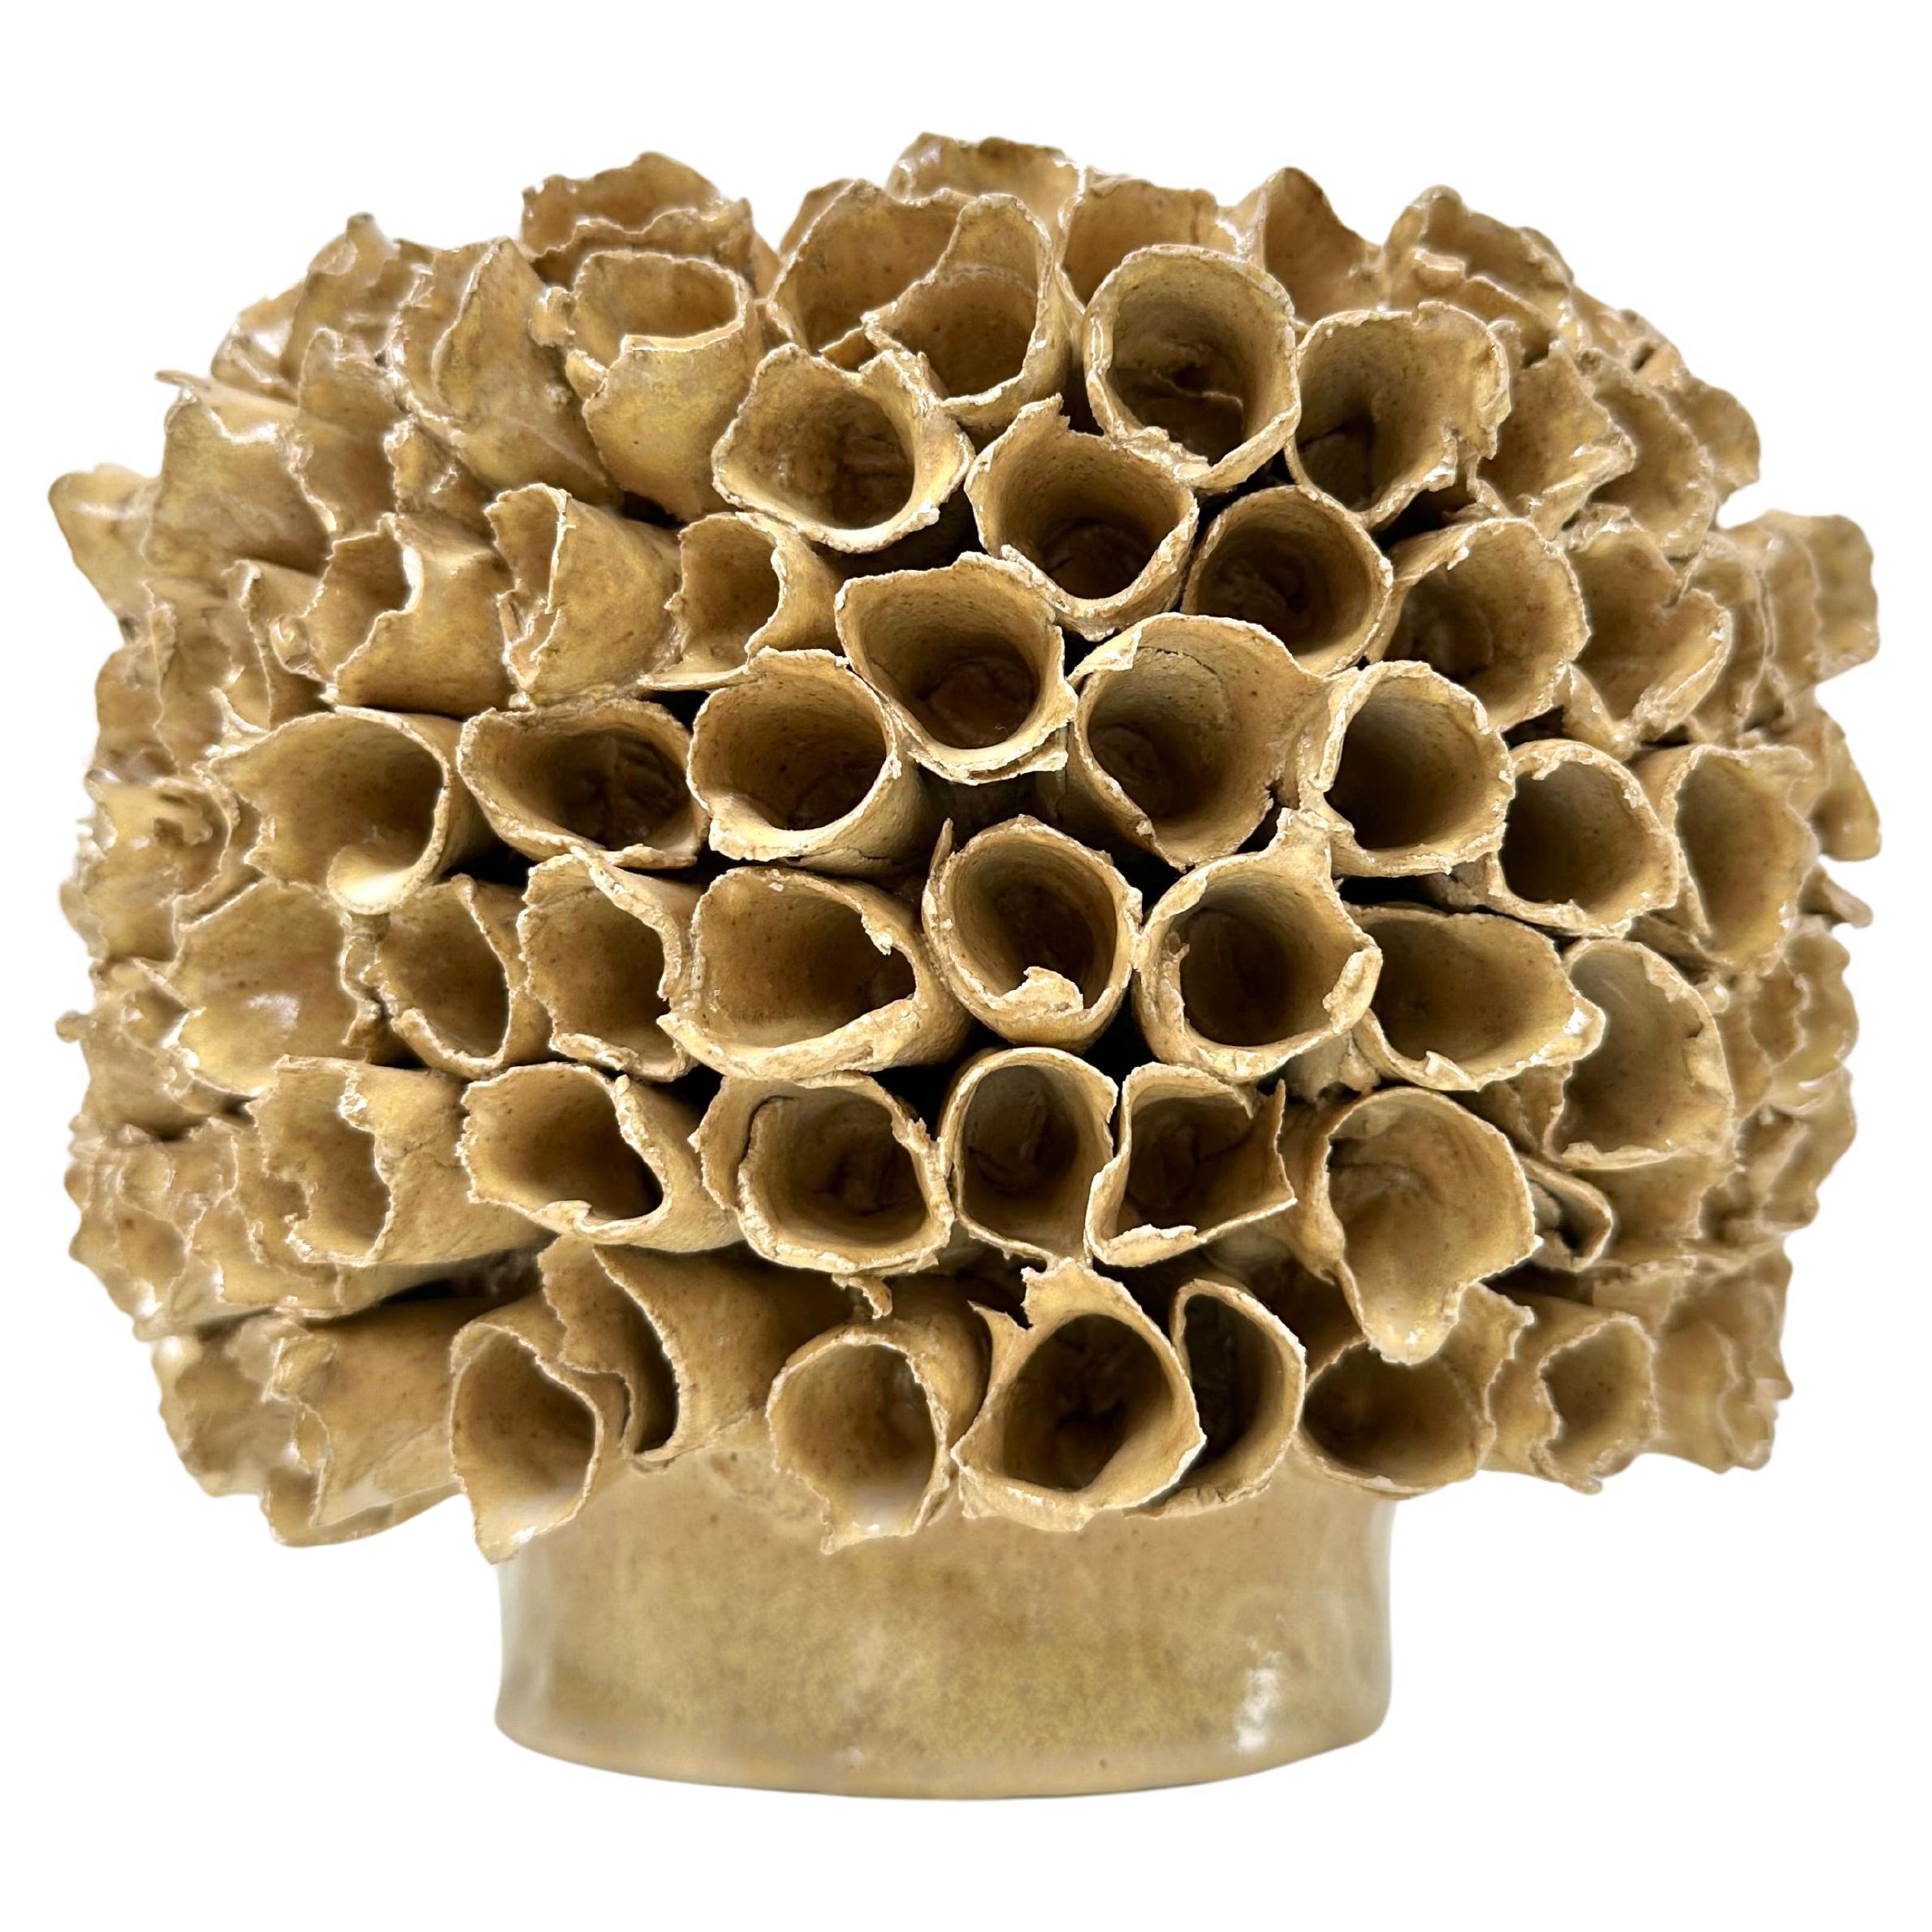 This original ceramic “Coral” Vase was designed and handmade in the 90s by Maria Verhaegh. An artist born in the Netherlands in 1942. In great condition.